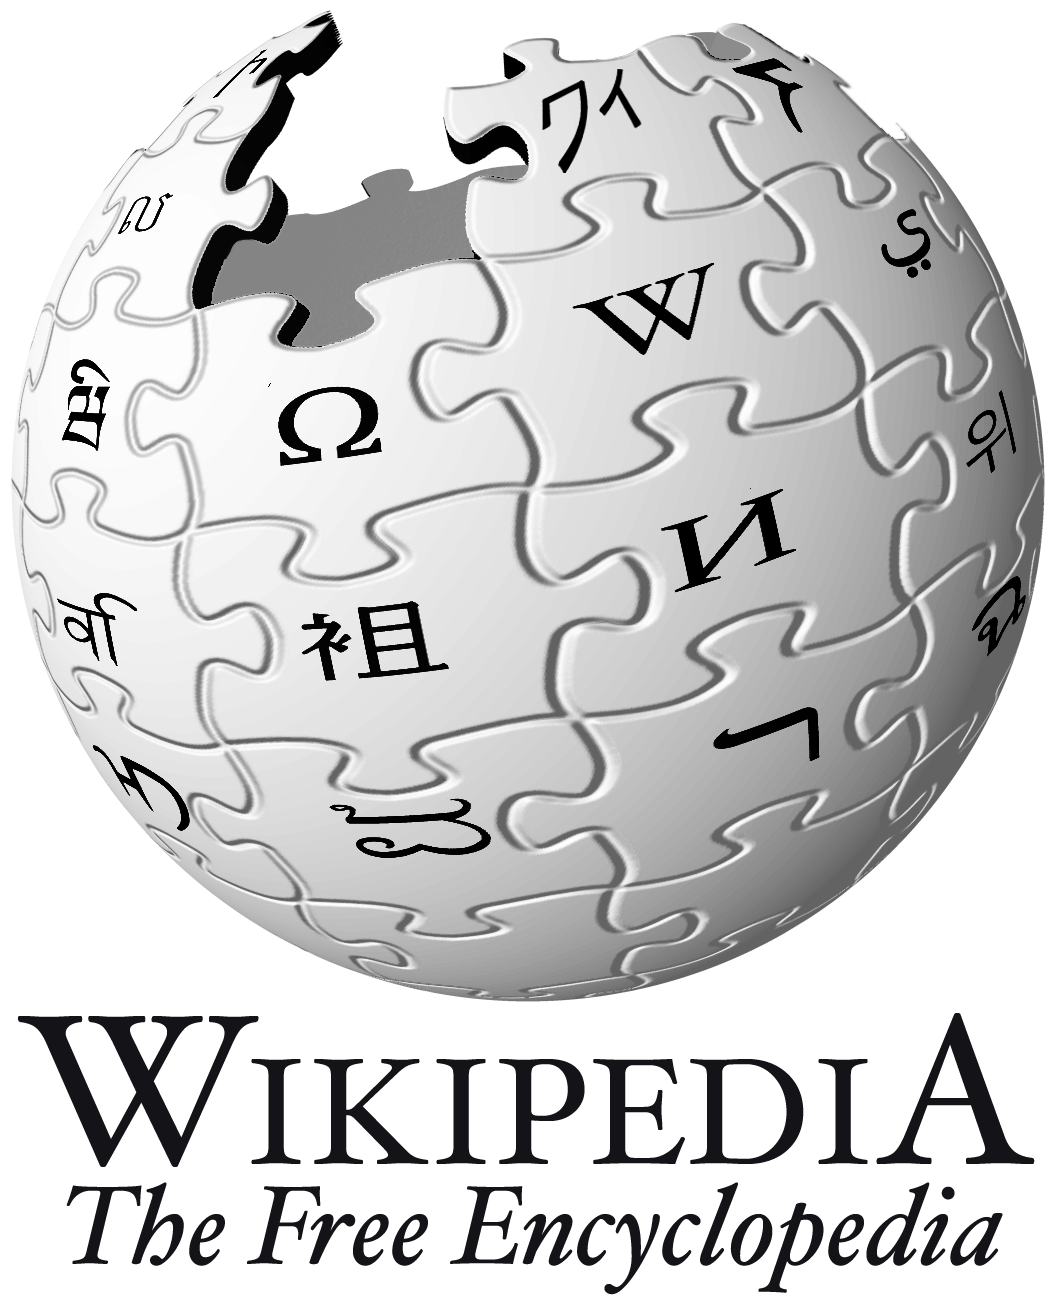 http://upload.wikimedia.org/wikipedia/commons/9/91/Nohat-logo-XI-big-text.png